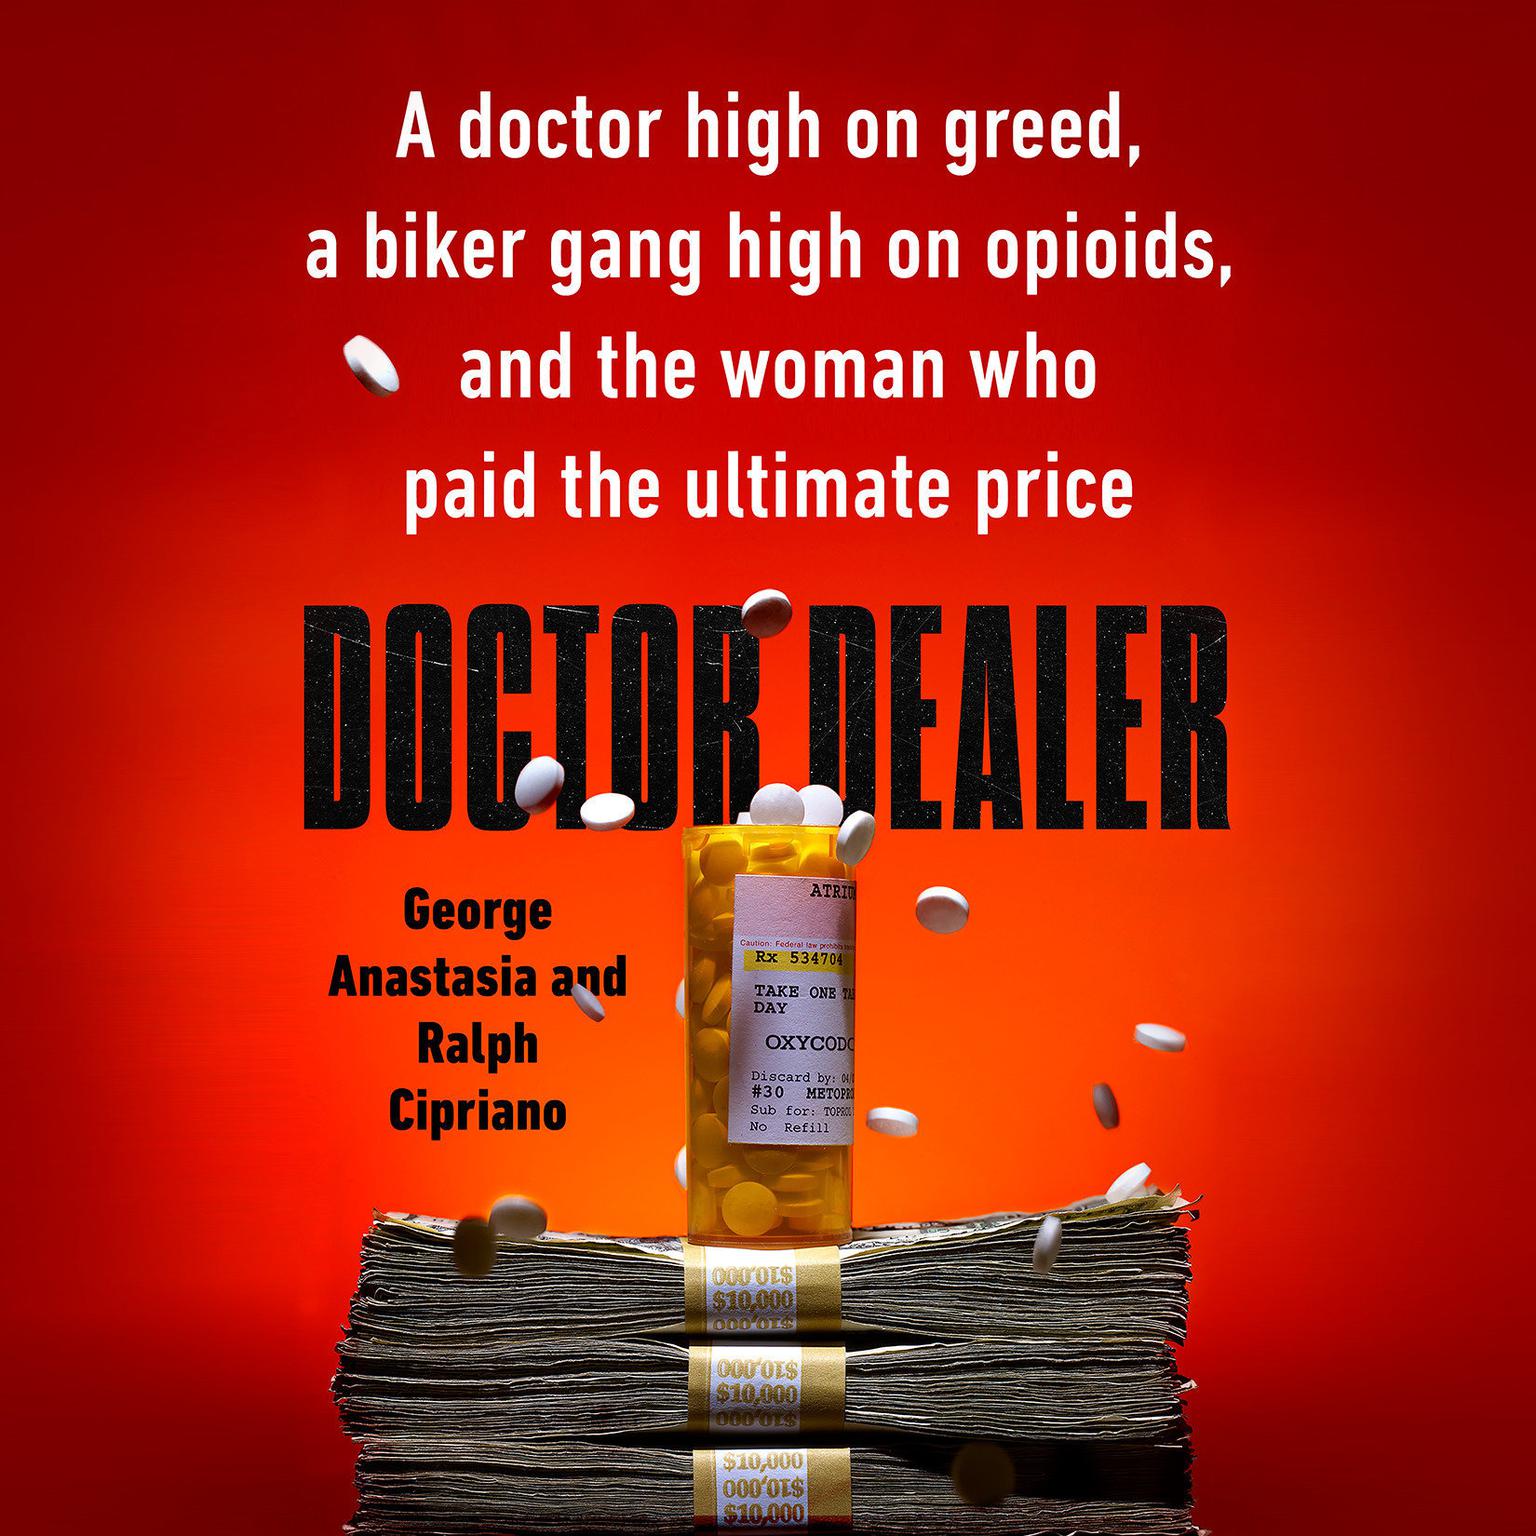 Doctor Dealer: A doctor high on greed, a biker gang high on opioids, and the woman who paid the ultimate price Audiobook, by George Anastasia